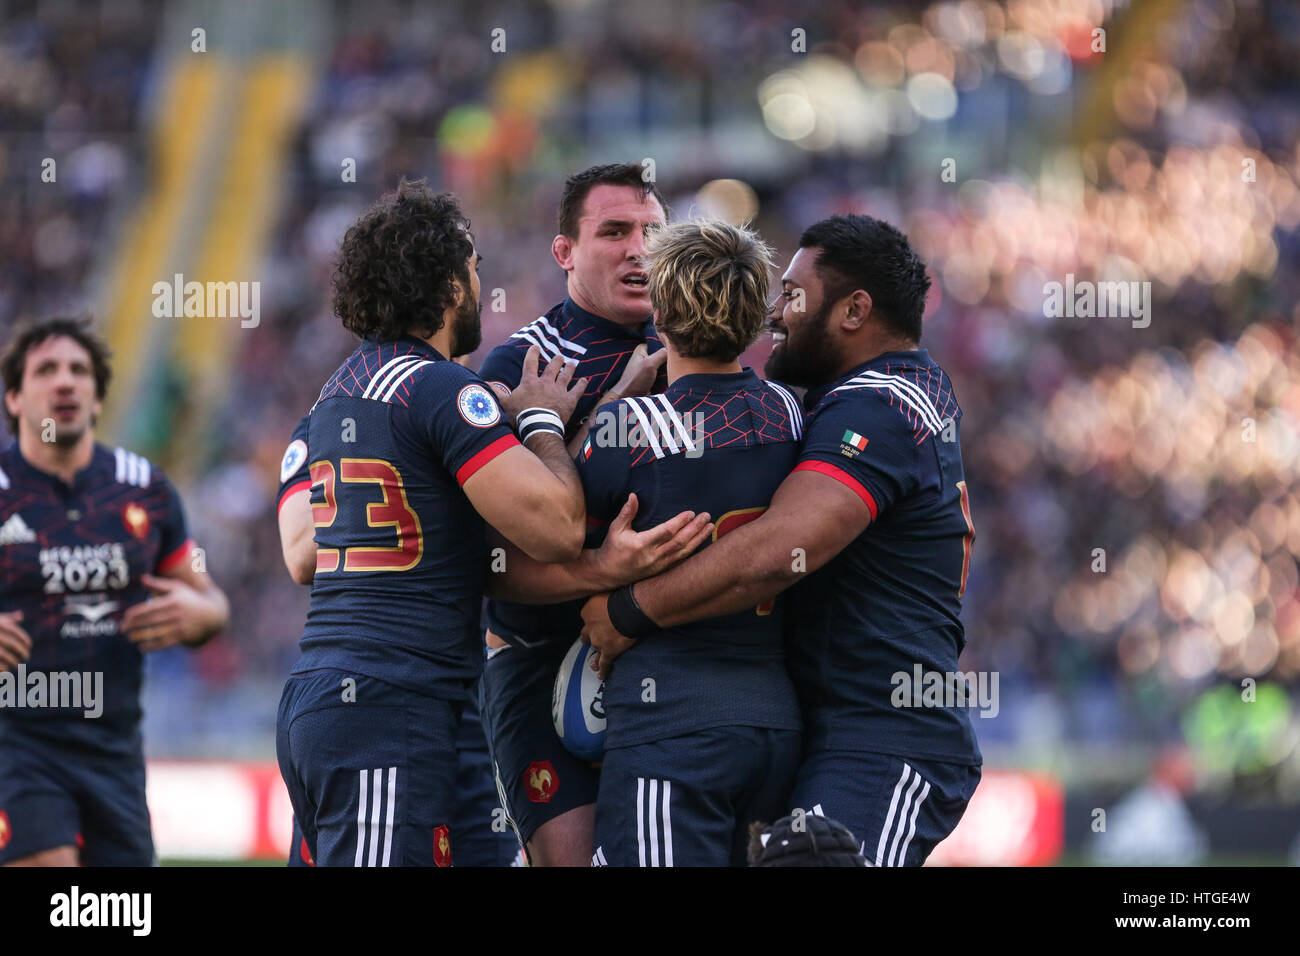 Rome, Italy. 11th Mar, 2017. France's n.8 Louis Picamoles celebrates a try in the rugby match against Italy in RBS 6Nations  Credit: Massimiliano Carnabuci/Alamy Live News Stock Photo